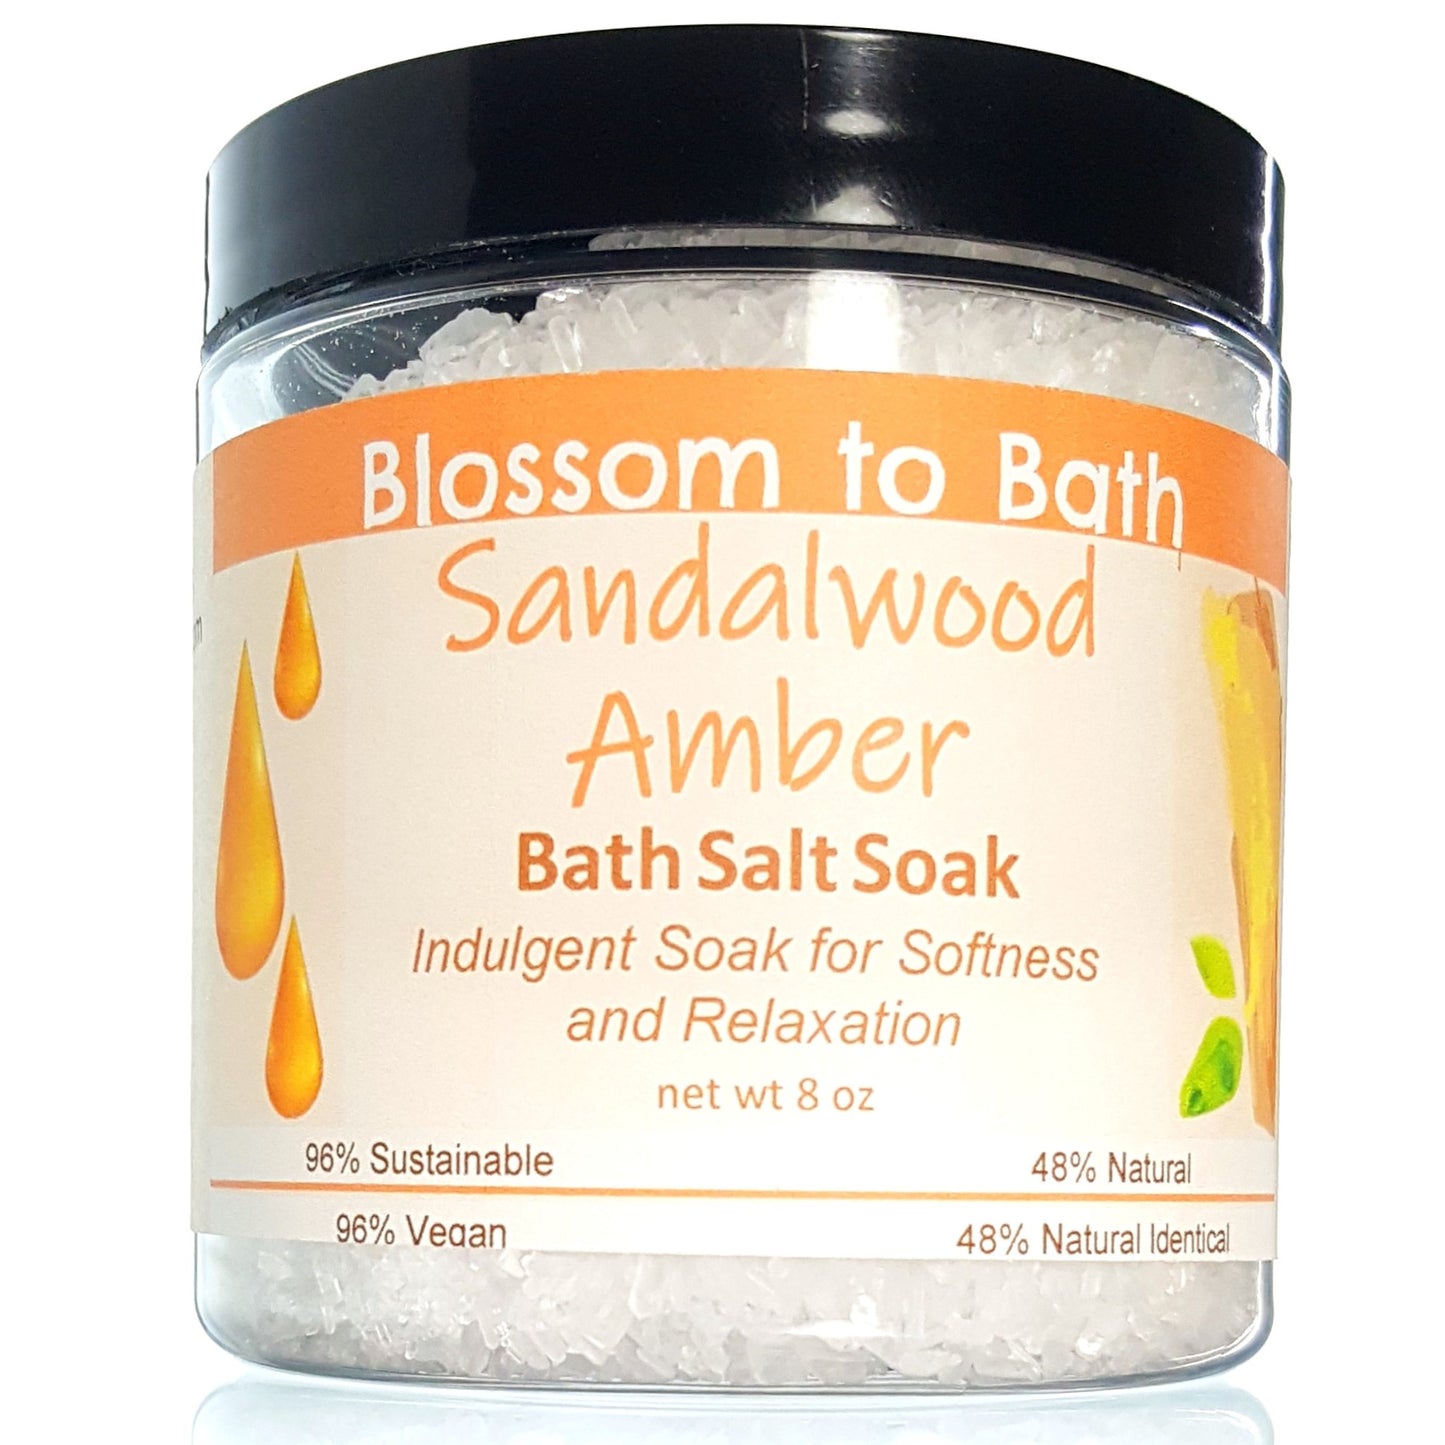 Buy Blossom to Bath Sandalwood Amber Bath Salt Soak from Flowersong Soap Studio.  Scented epsom salts for a luxurious soaking experience  An irresistible combination of warm sandalwood and spice.